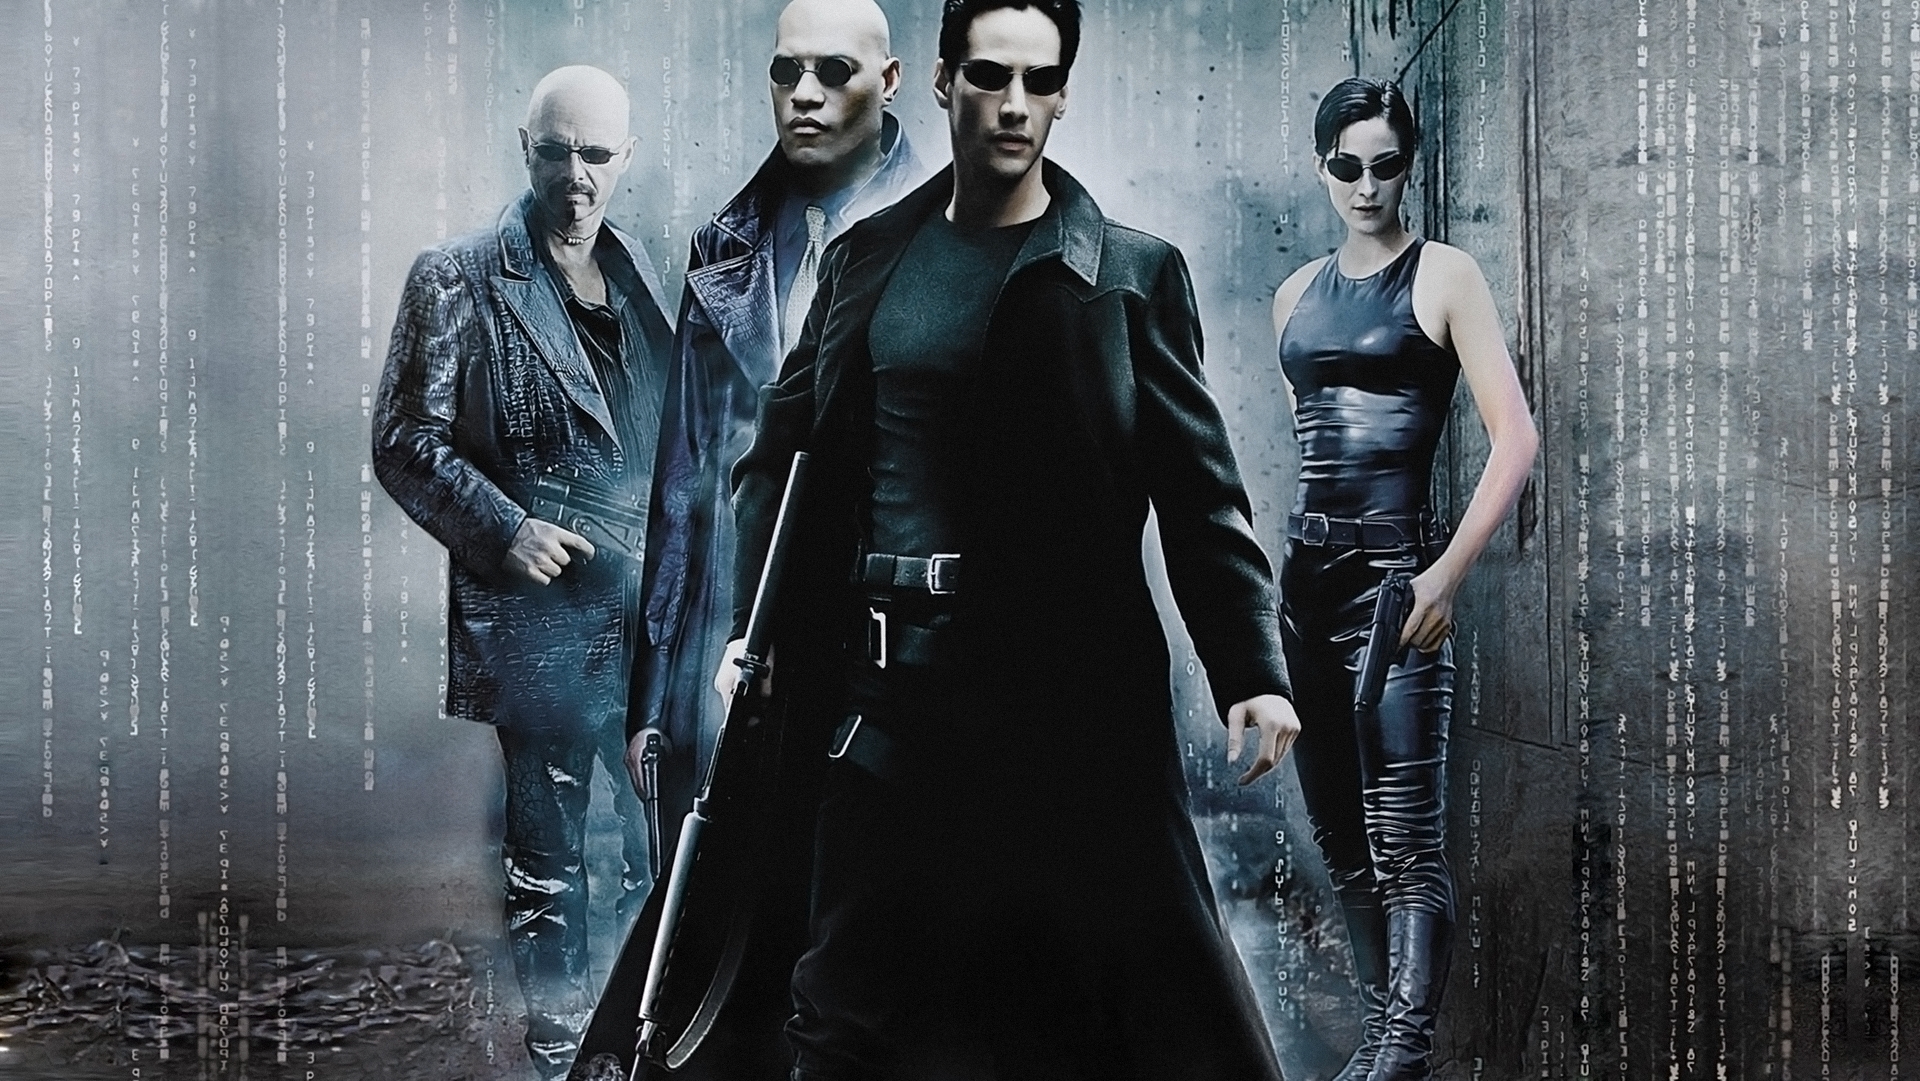 laurence fishburne, movie, the matrix, carrie anne moss, keanu reeves, neo (the matrix)